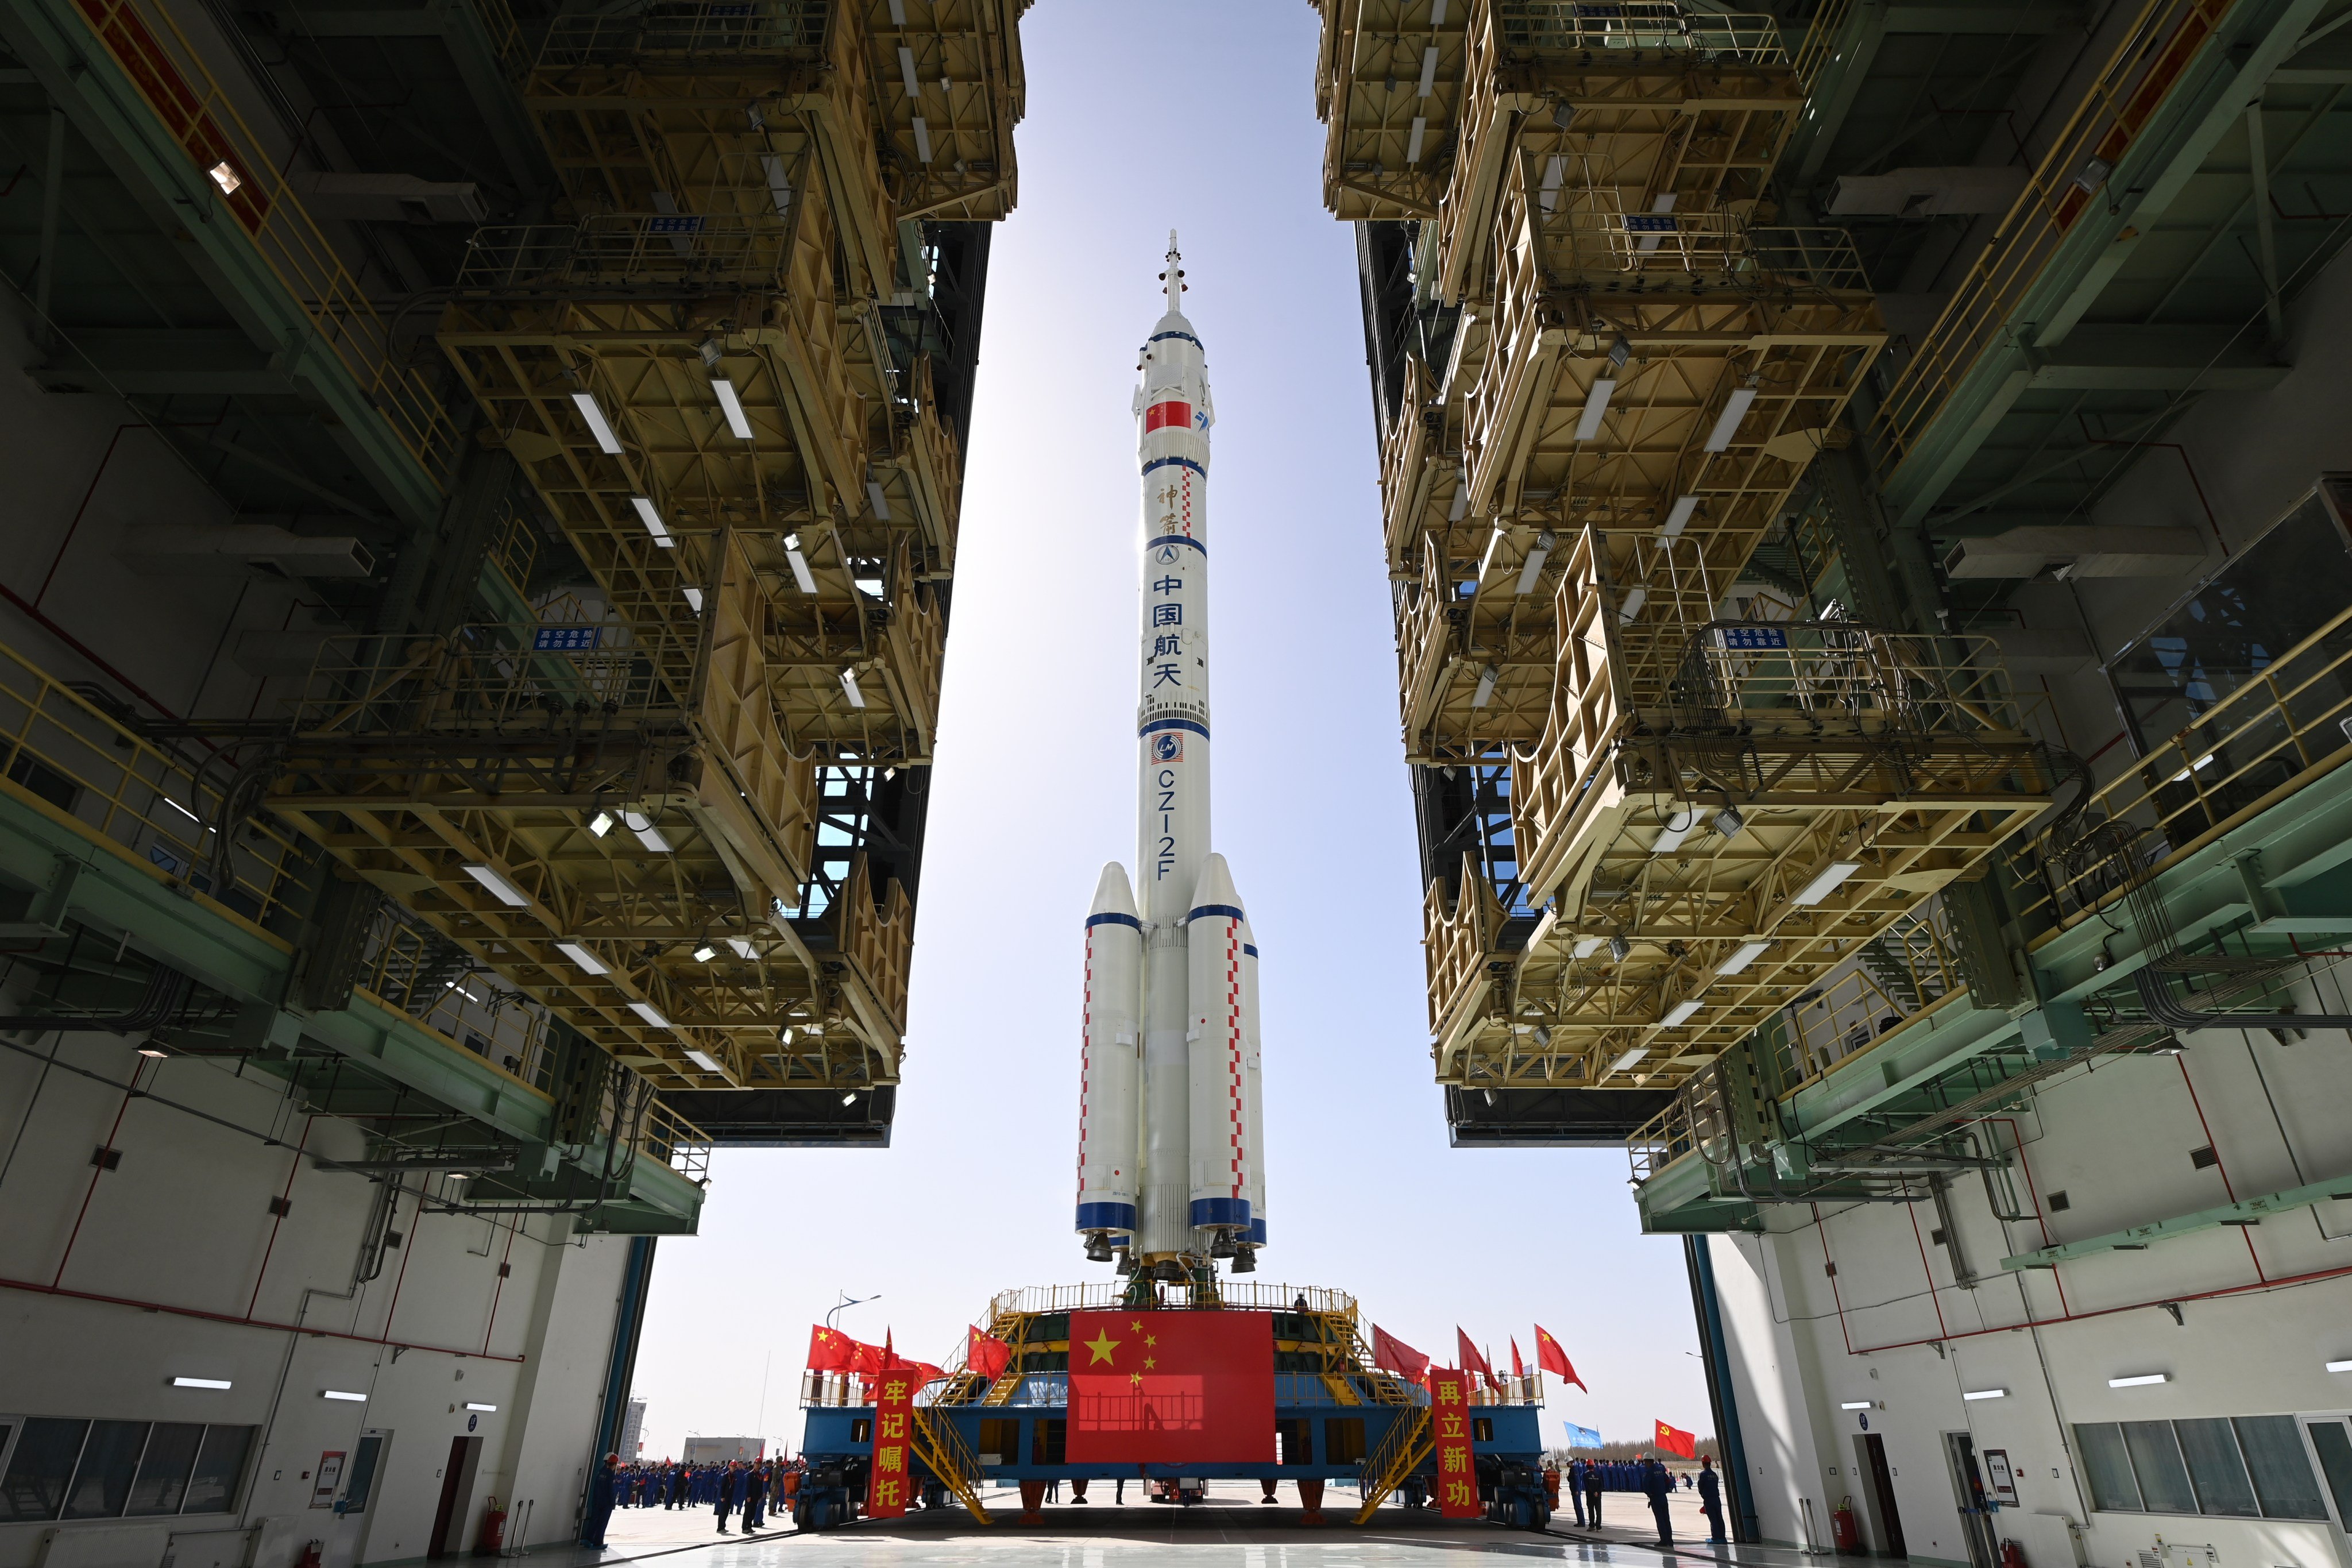 The Shenzhou-18 spaceship and a Long March-2F carrier rocket are pictured at the Jiuquan Satellite Launch Centre in northwest China. 
China’s rapid development of counter-space weapons is putting US space capabilities at risk, according to the head of the US Space Command. Photo: Xinhua